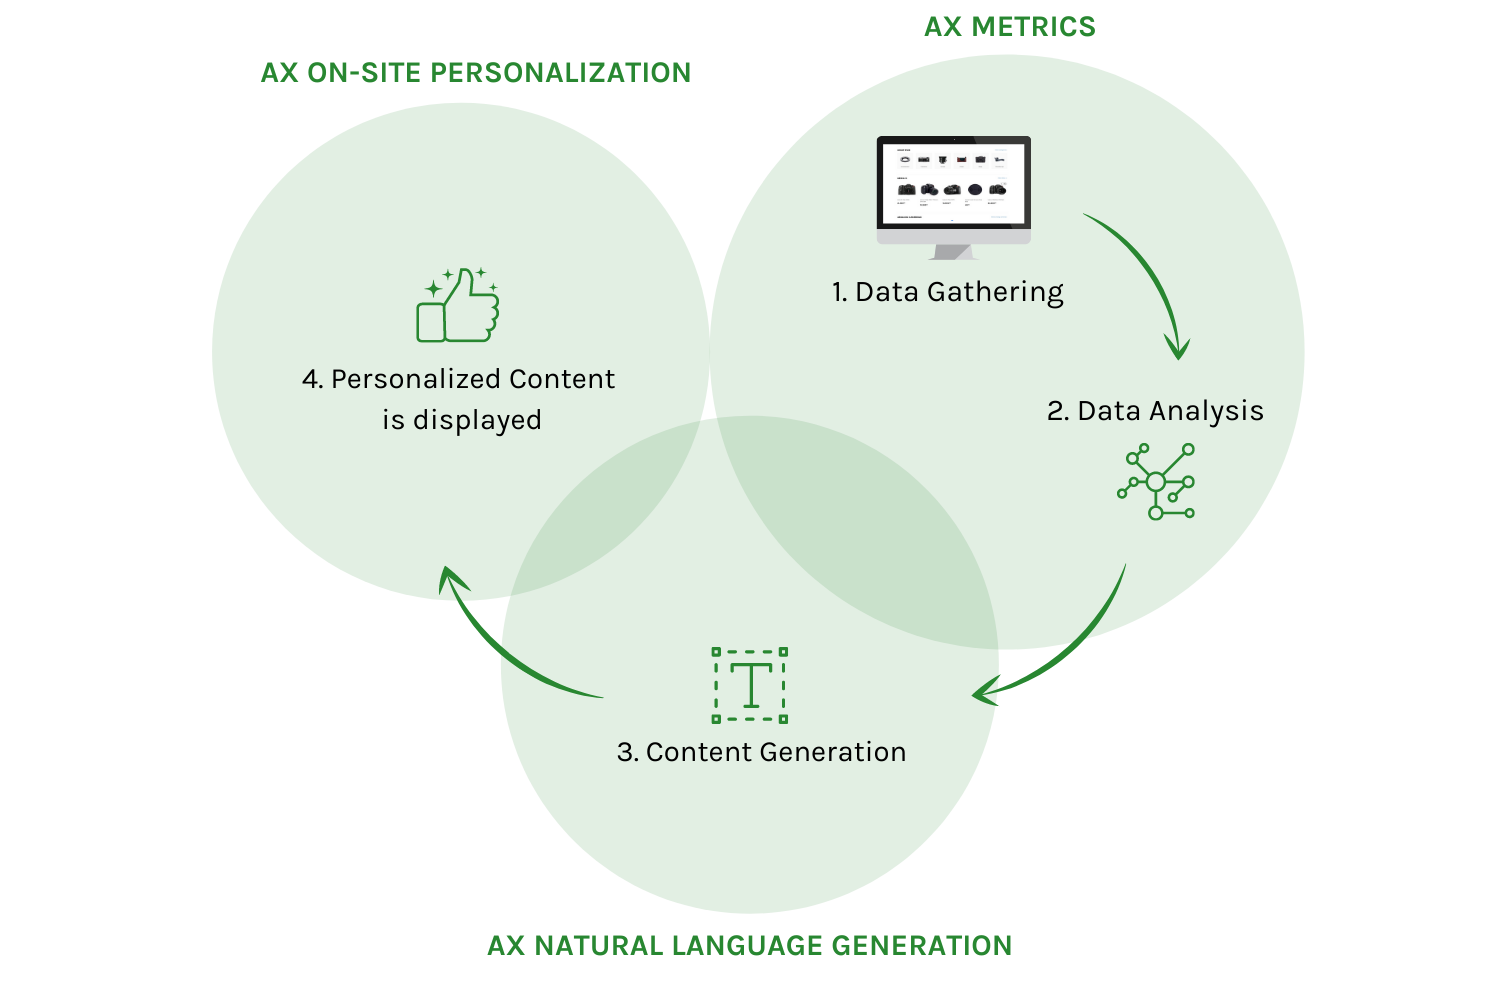 Data Analysis, Automated Content Generation and On-Site Personalization